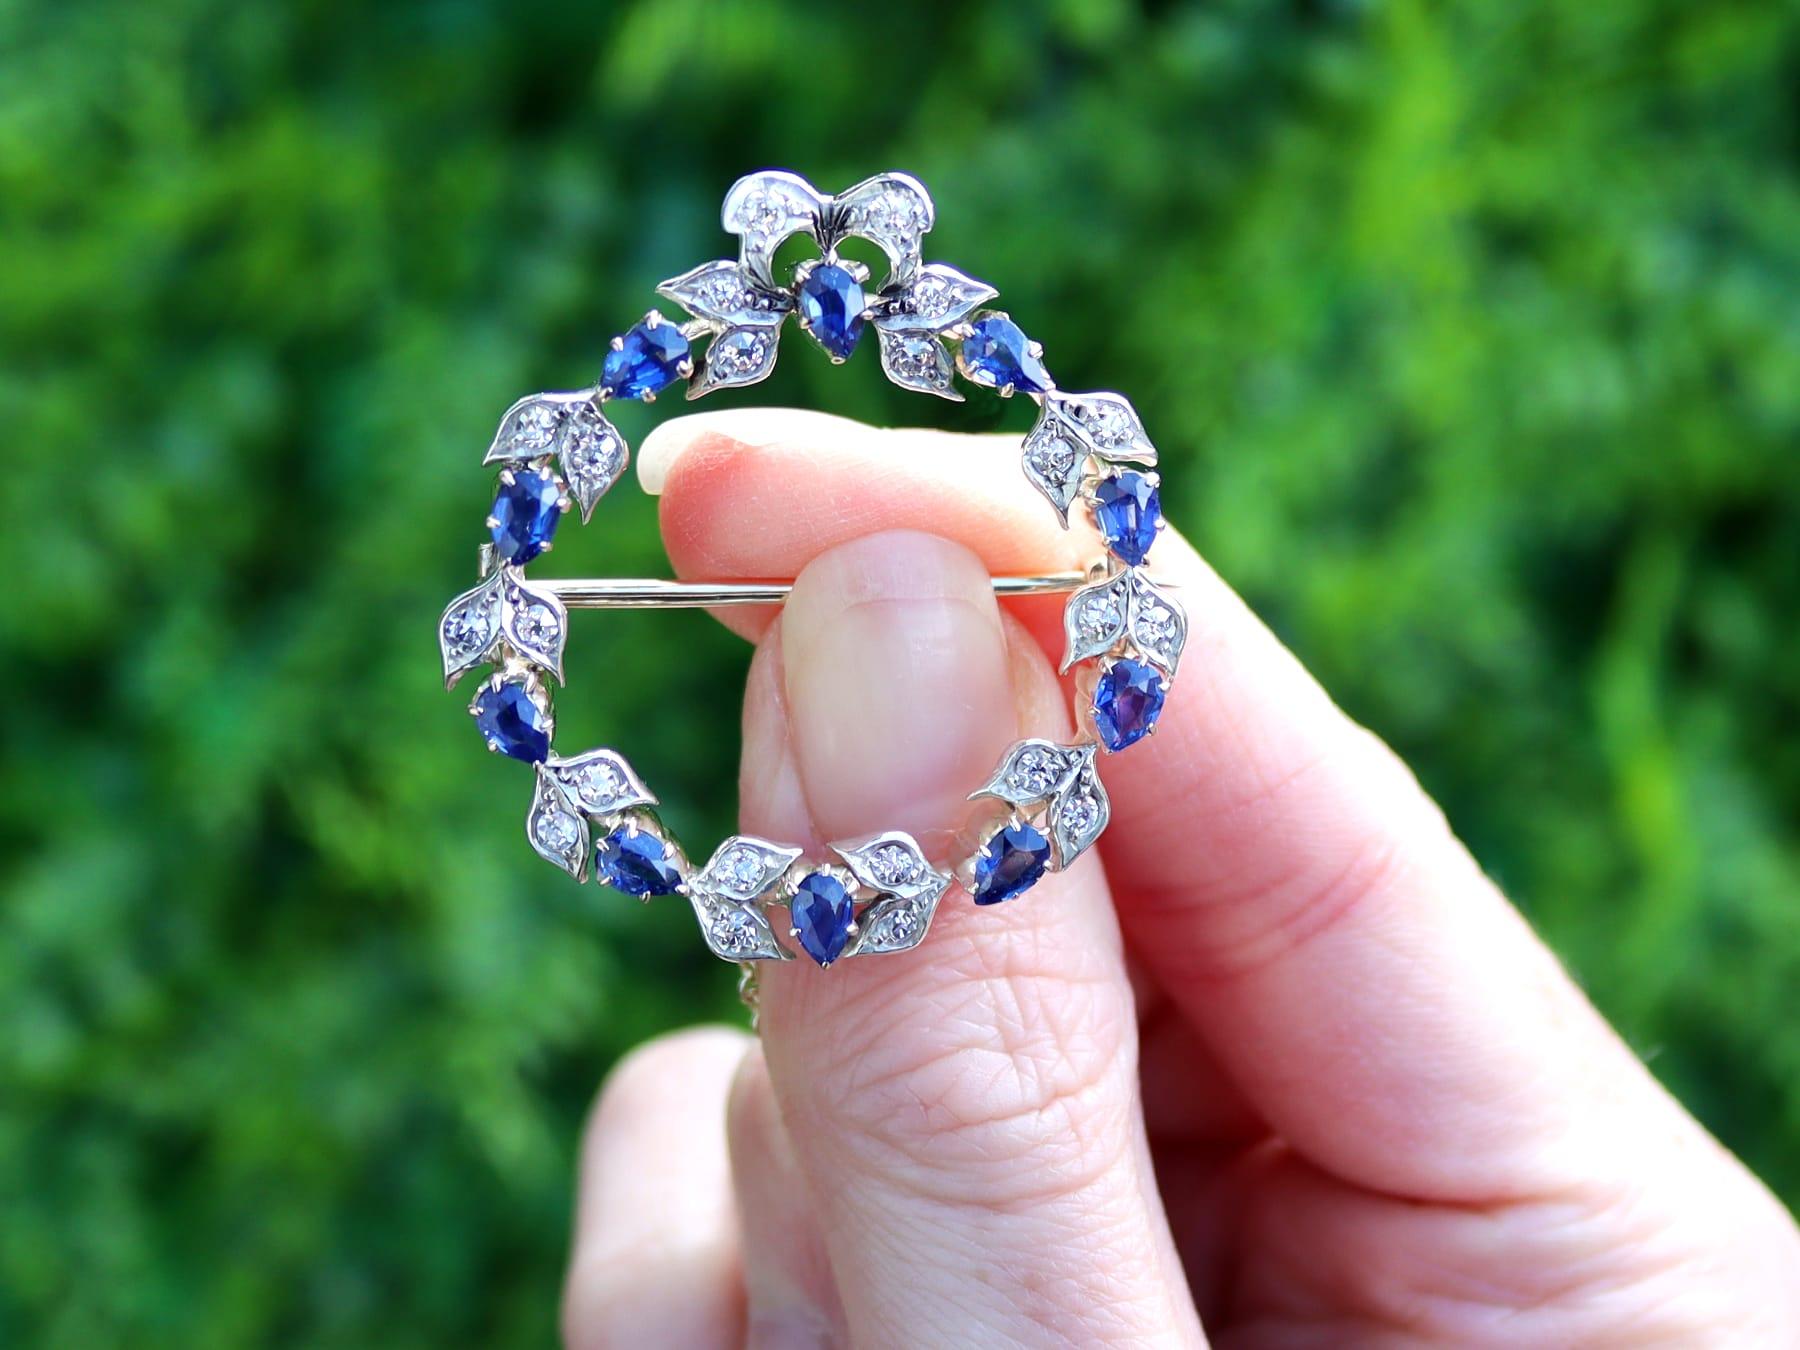 A fine and impressive antique Victorian 2.90 carat sapphire and 0.92 carat diamond, 9 karat yellow gold and silver set wreath brooch; part of our diverse collection of sapphire brooches.

This stunning, fine and impressive antique brooch has been